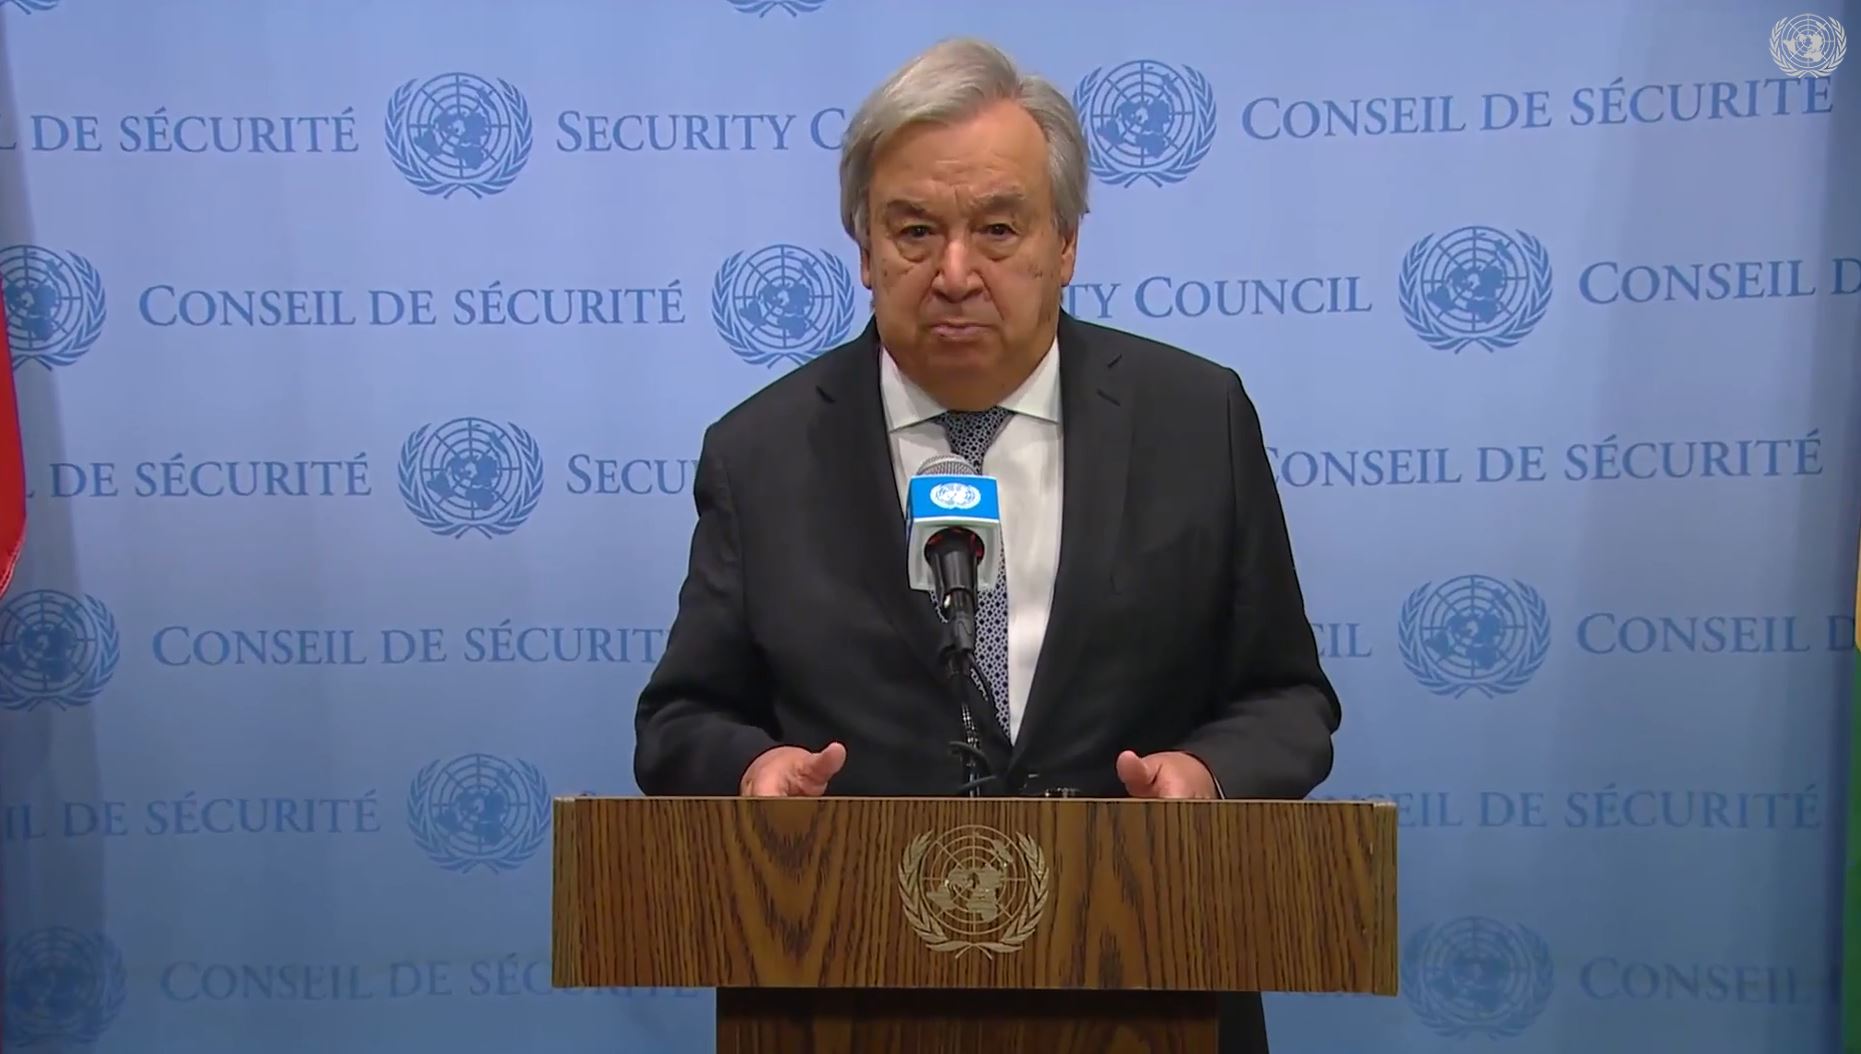 UN Secretary-General António Guterres hit back at Israeli claims on Wednesday in New York